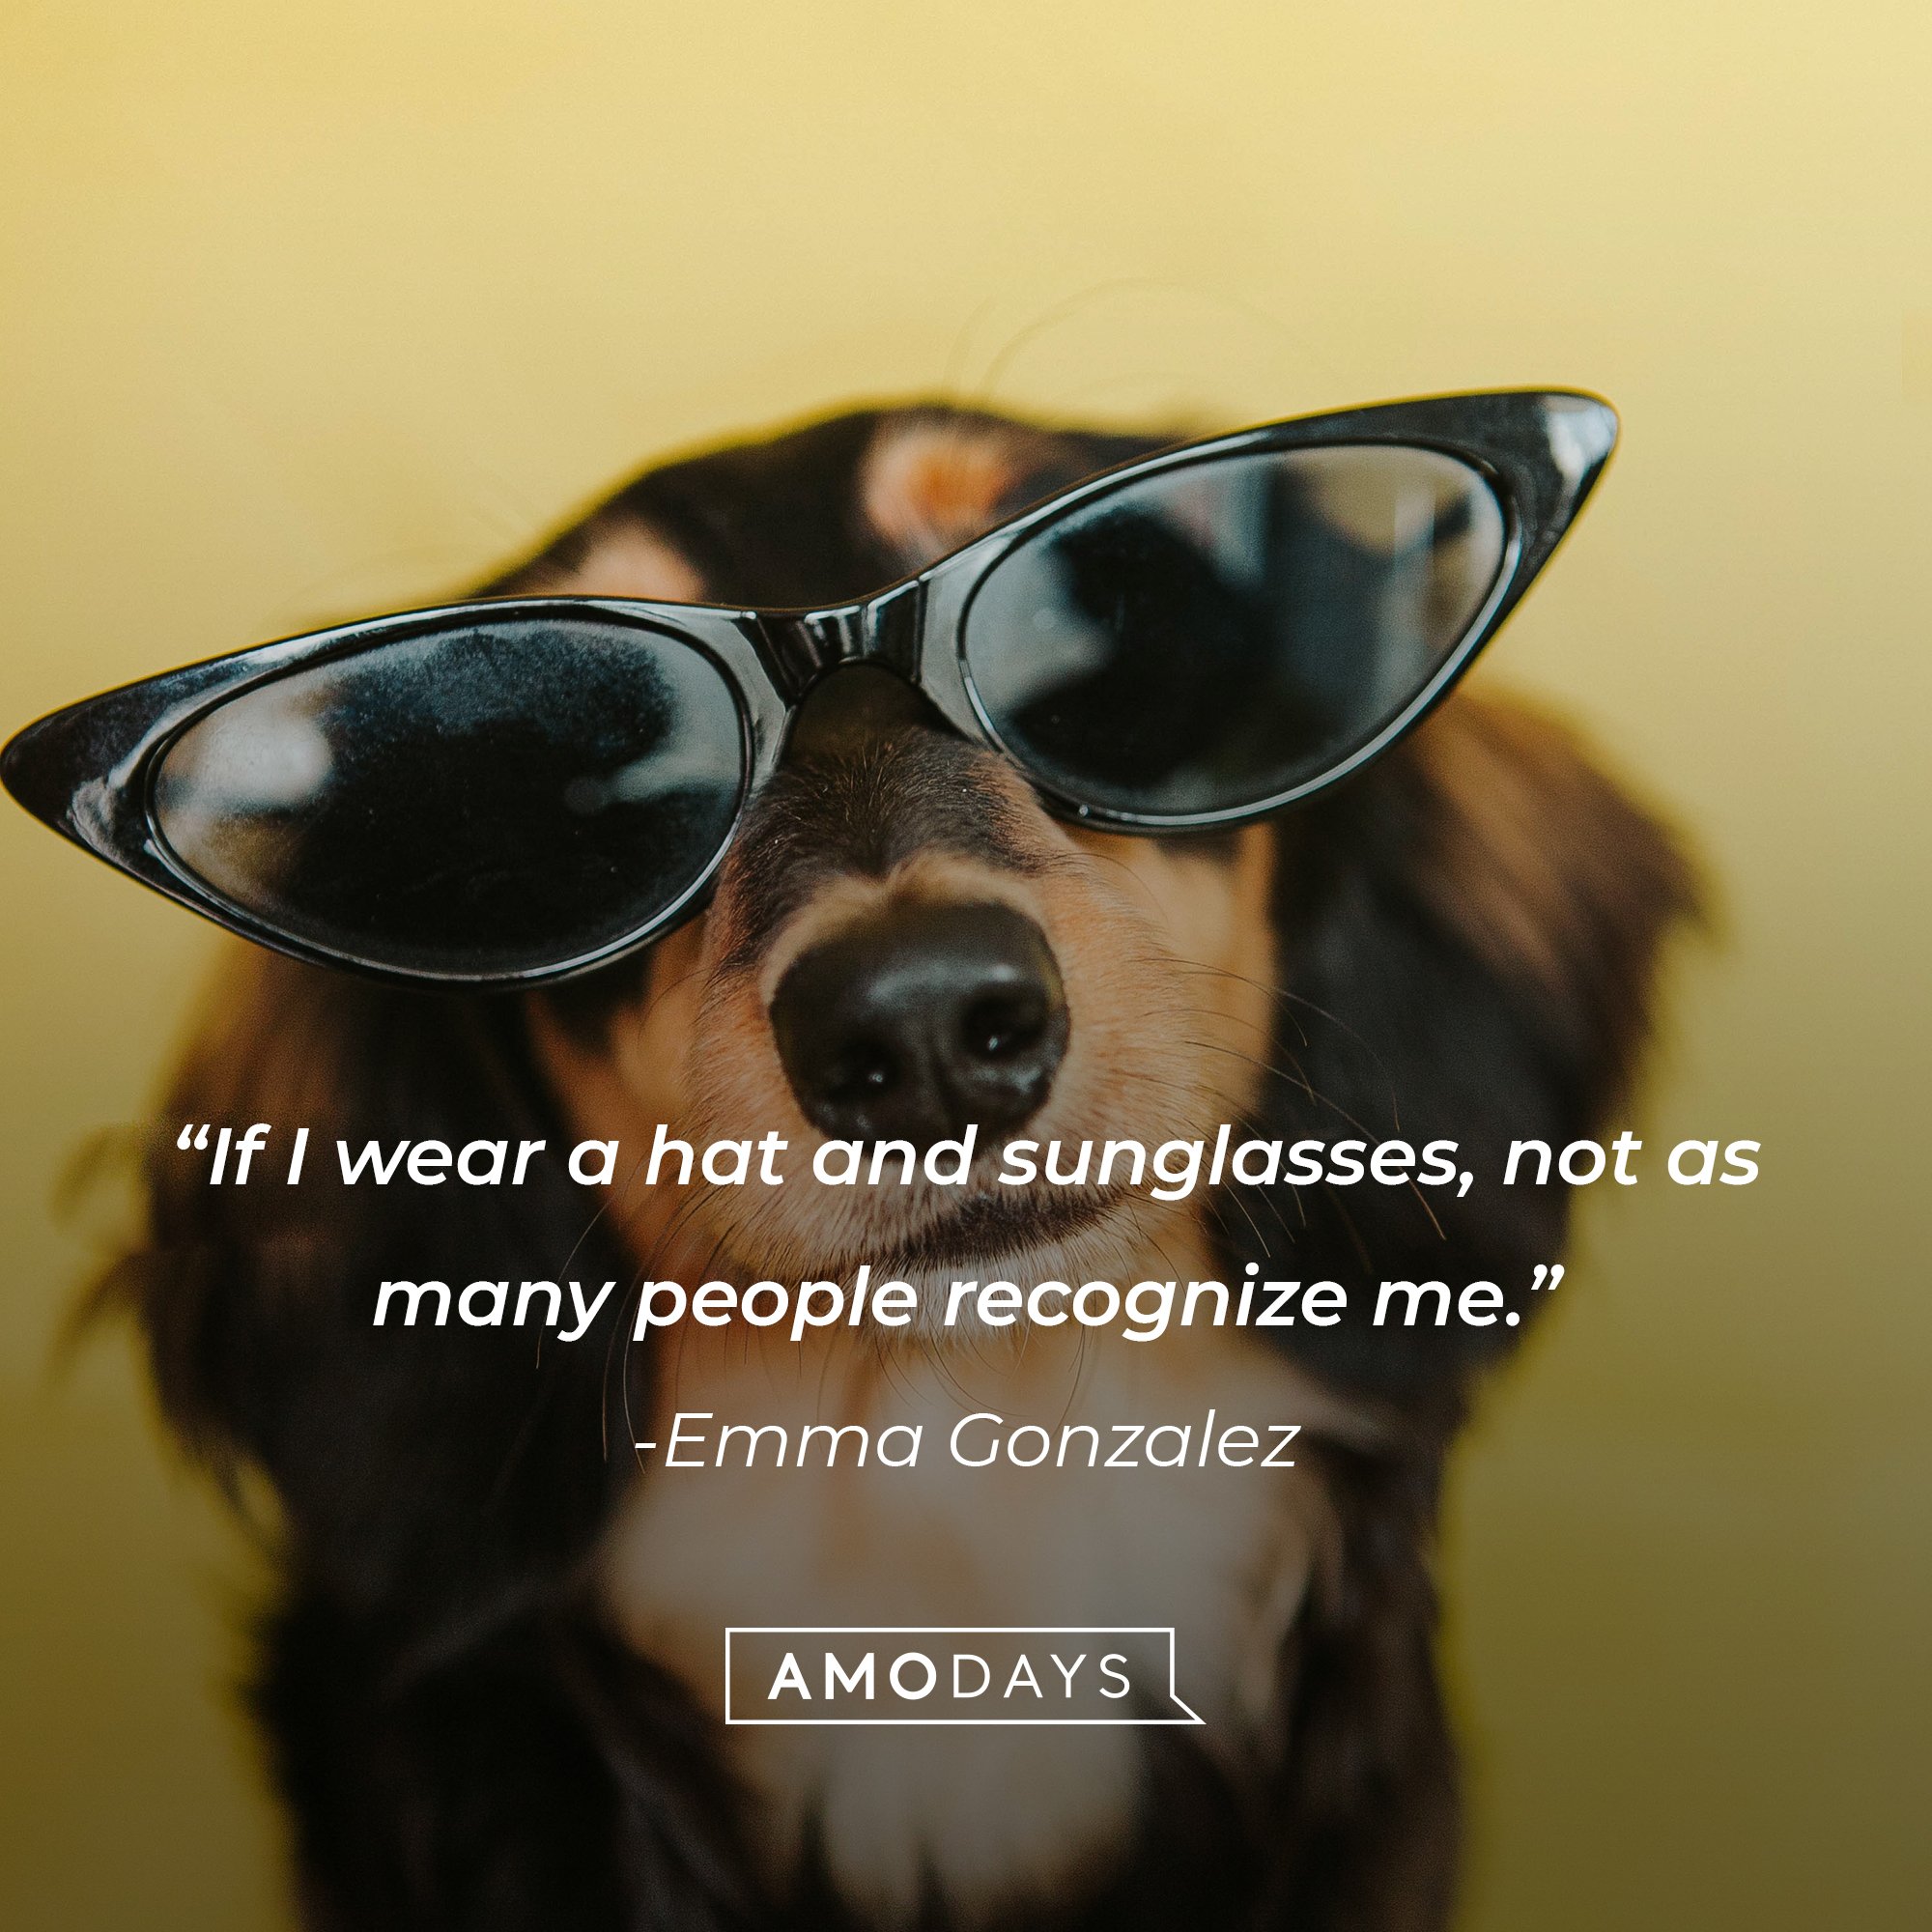 Emma Gonzalez’ quote: "If I wear a hat and sunglasses, not as many people recognize me." | Image: AmoDays 